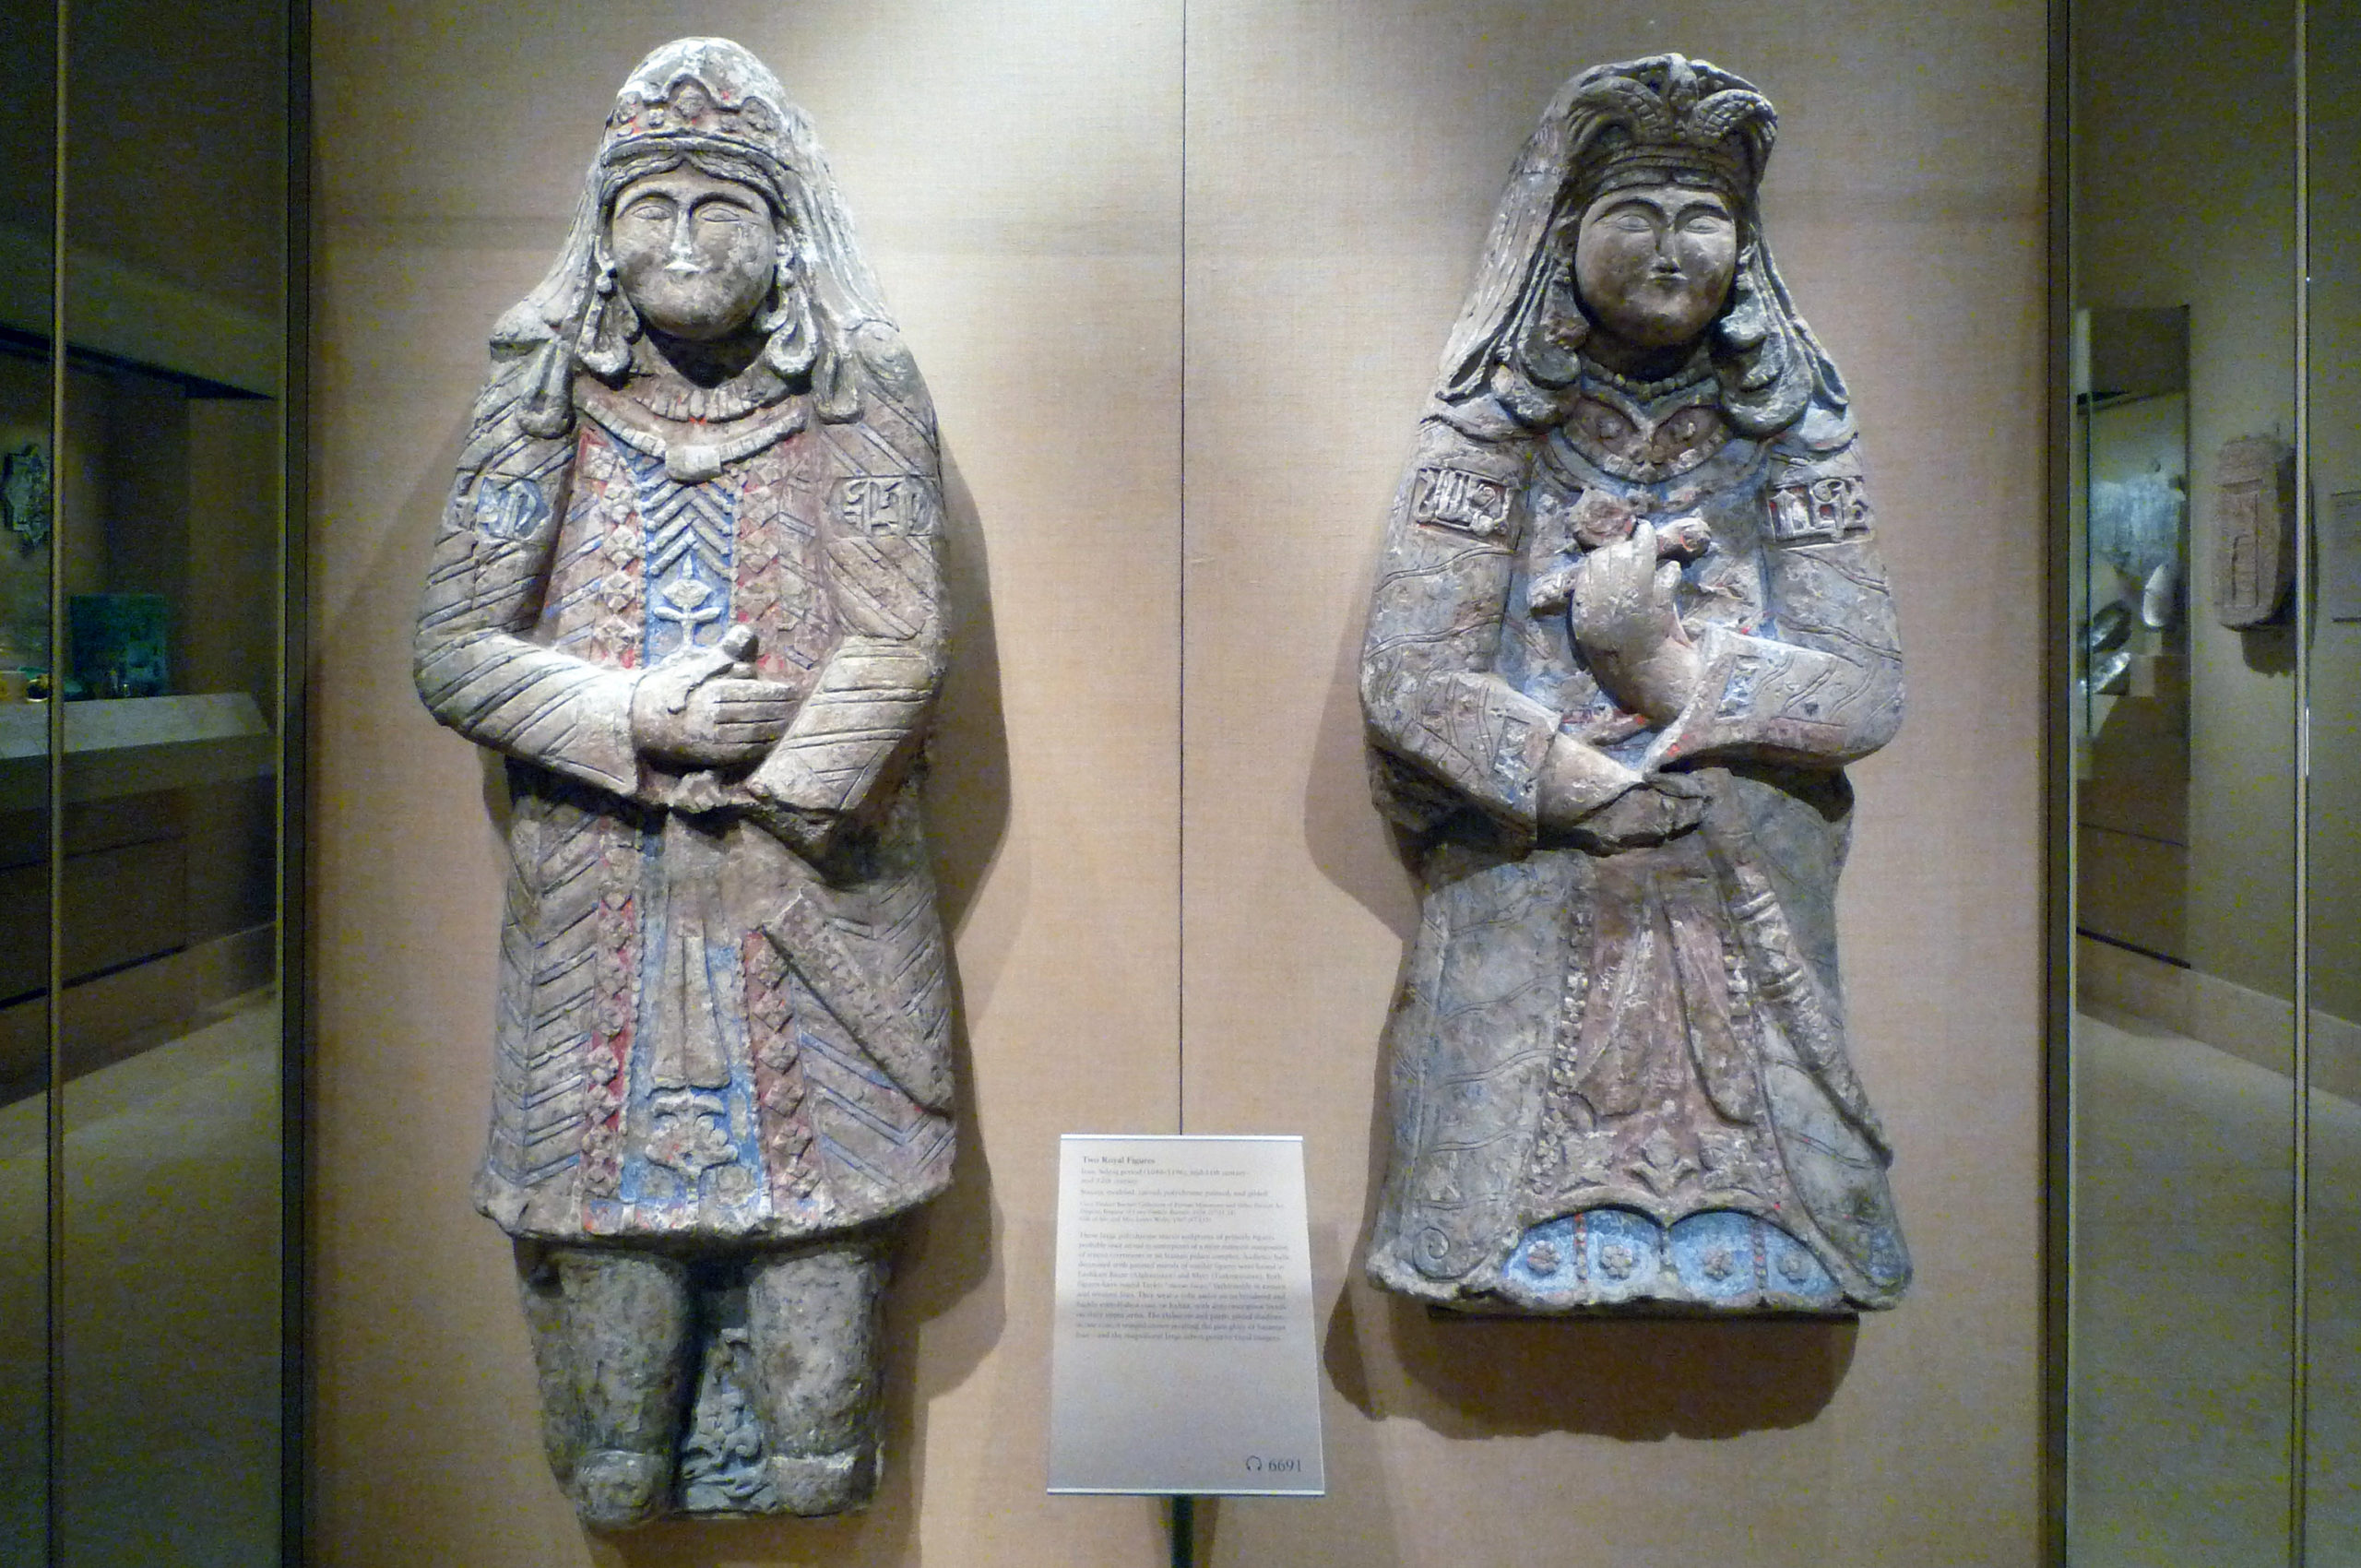 Two Royal Figures, Iran (Saljuq period), mid 11th - mid 12th c., painted and gilded stucco (Metropolitan Museum of Art; photo: Steven Zucker, CC BY-NC-SA 2.0)